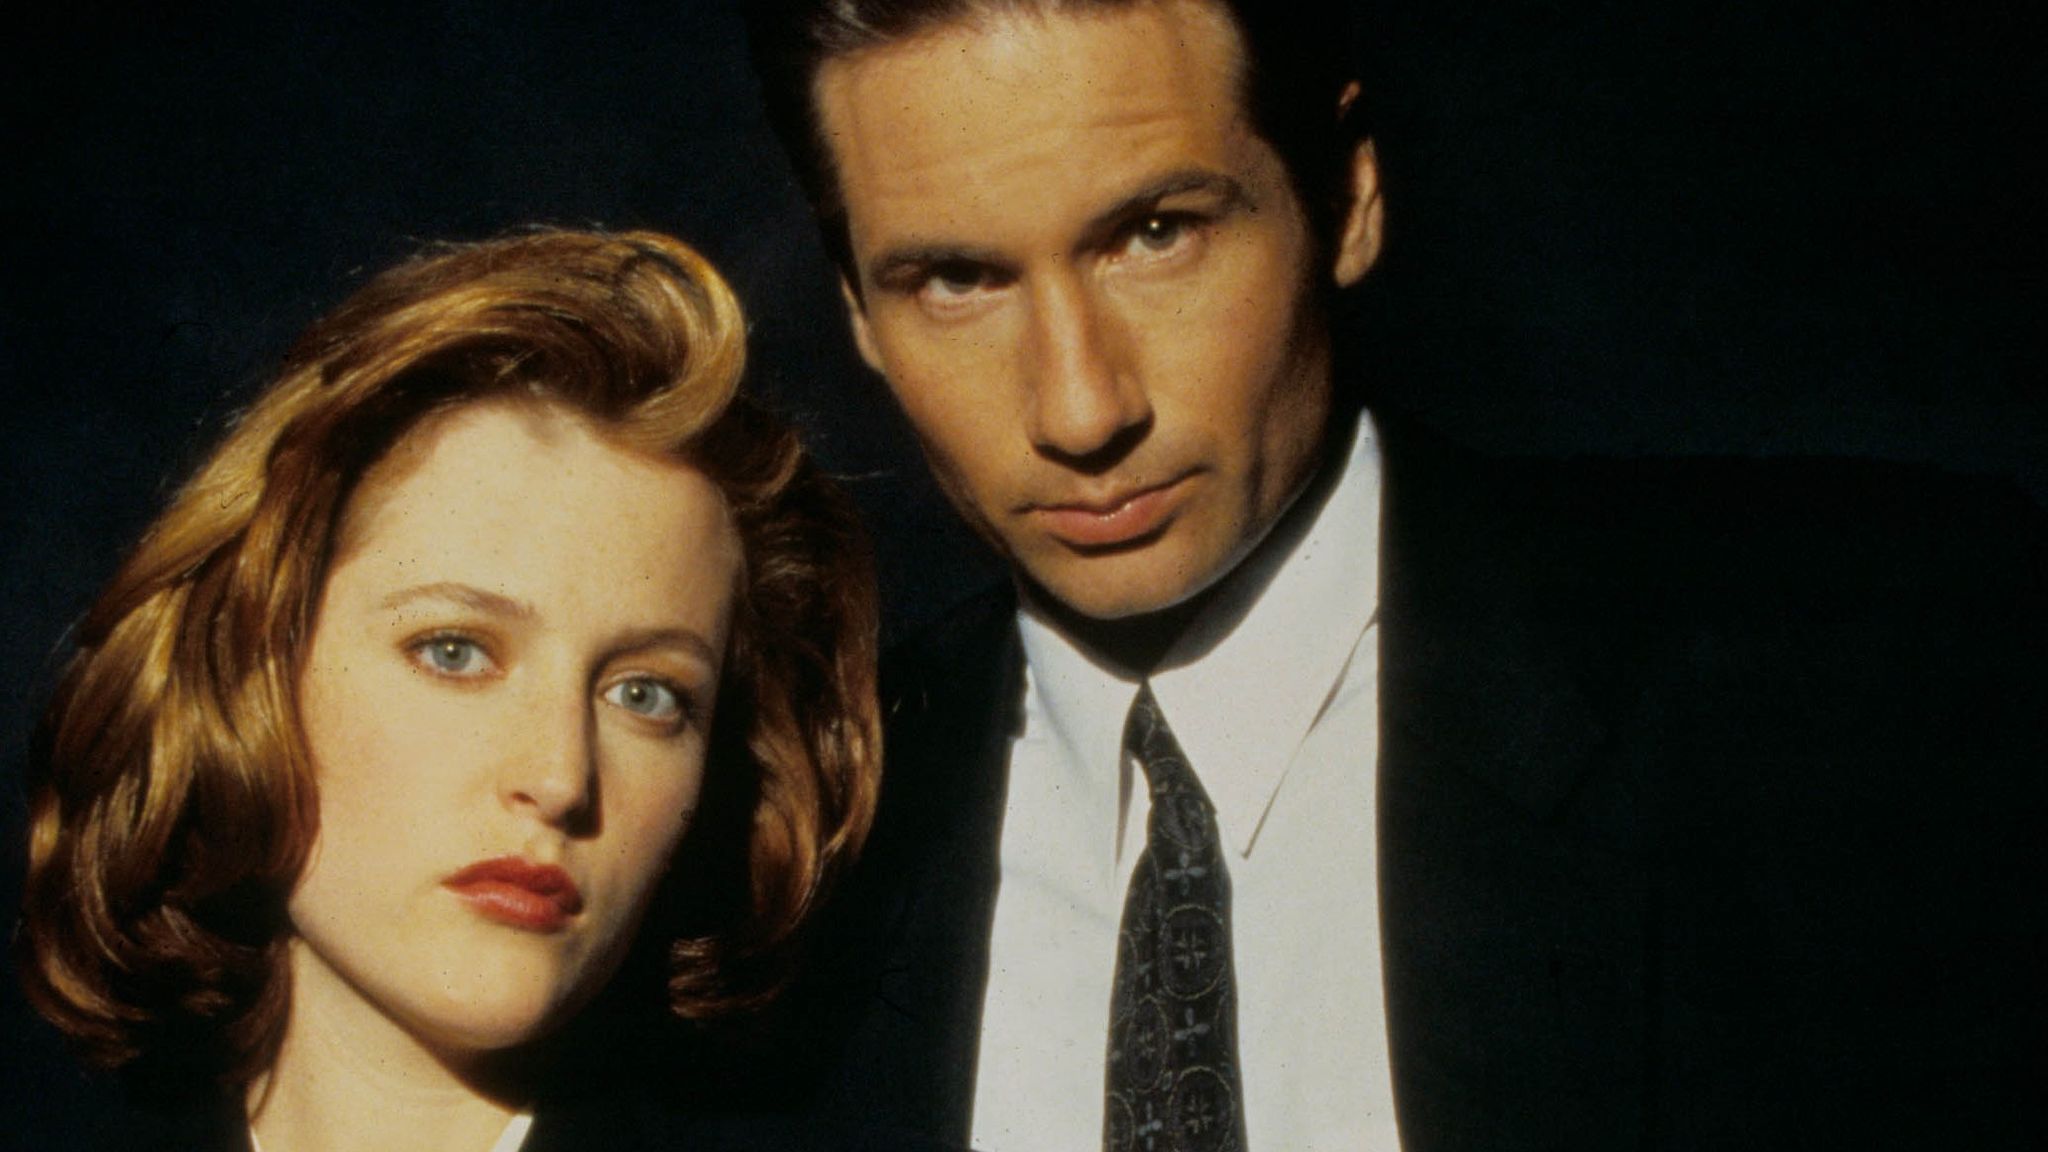 The X-Files: Mulder and Scully reunite with cast for new project